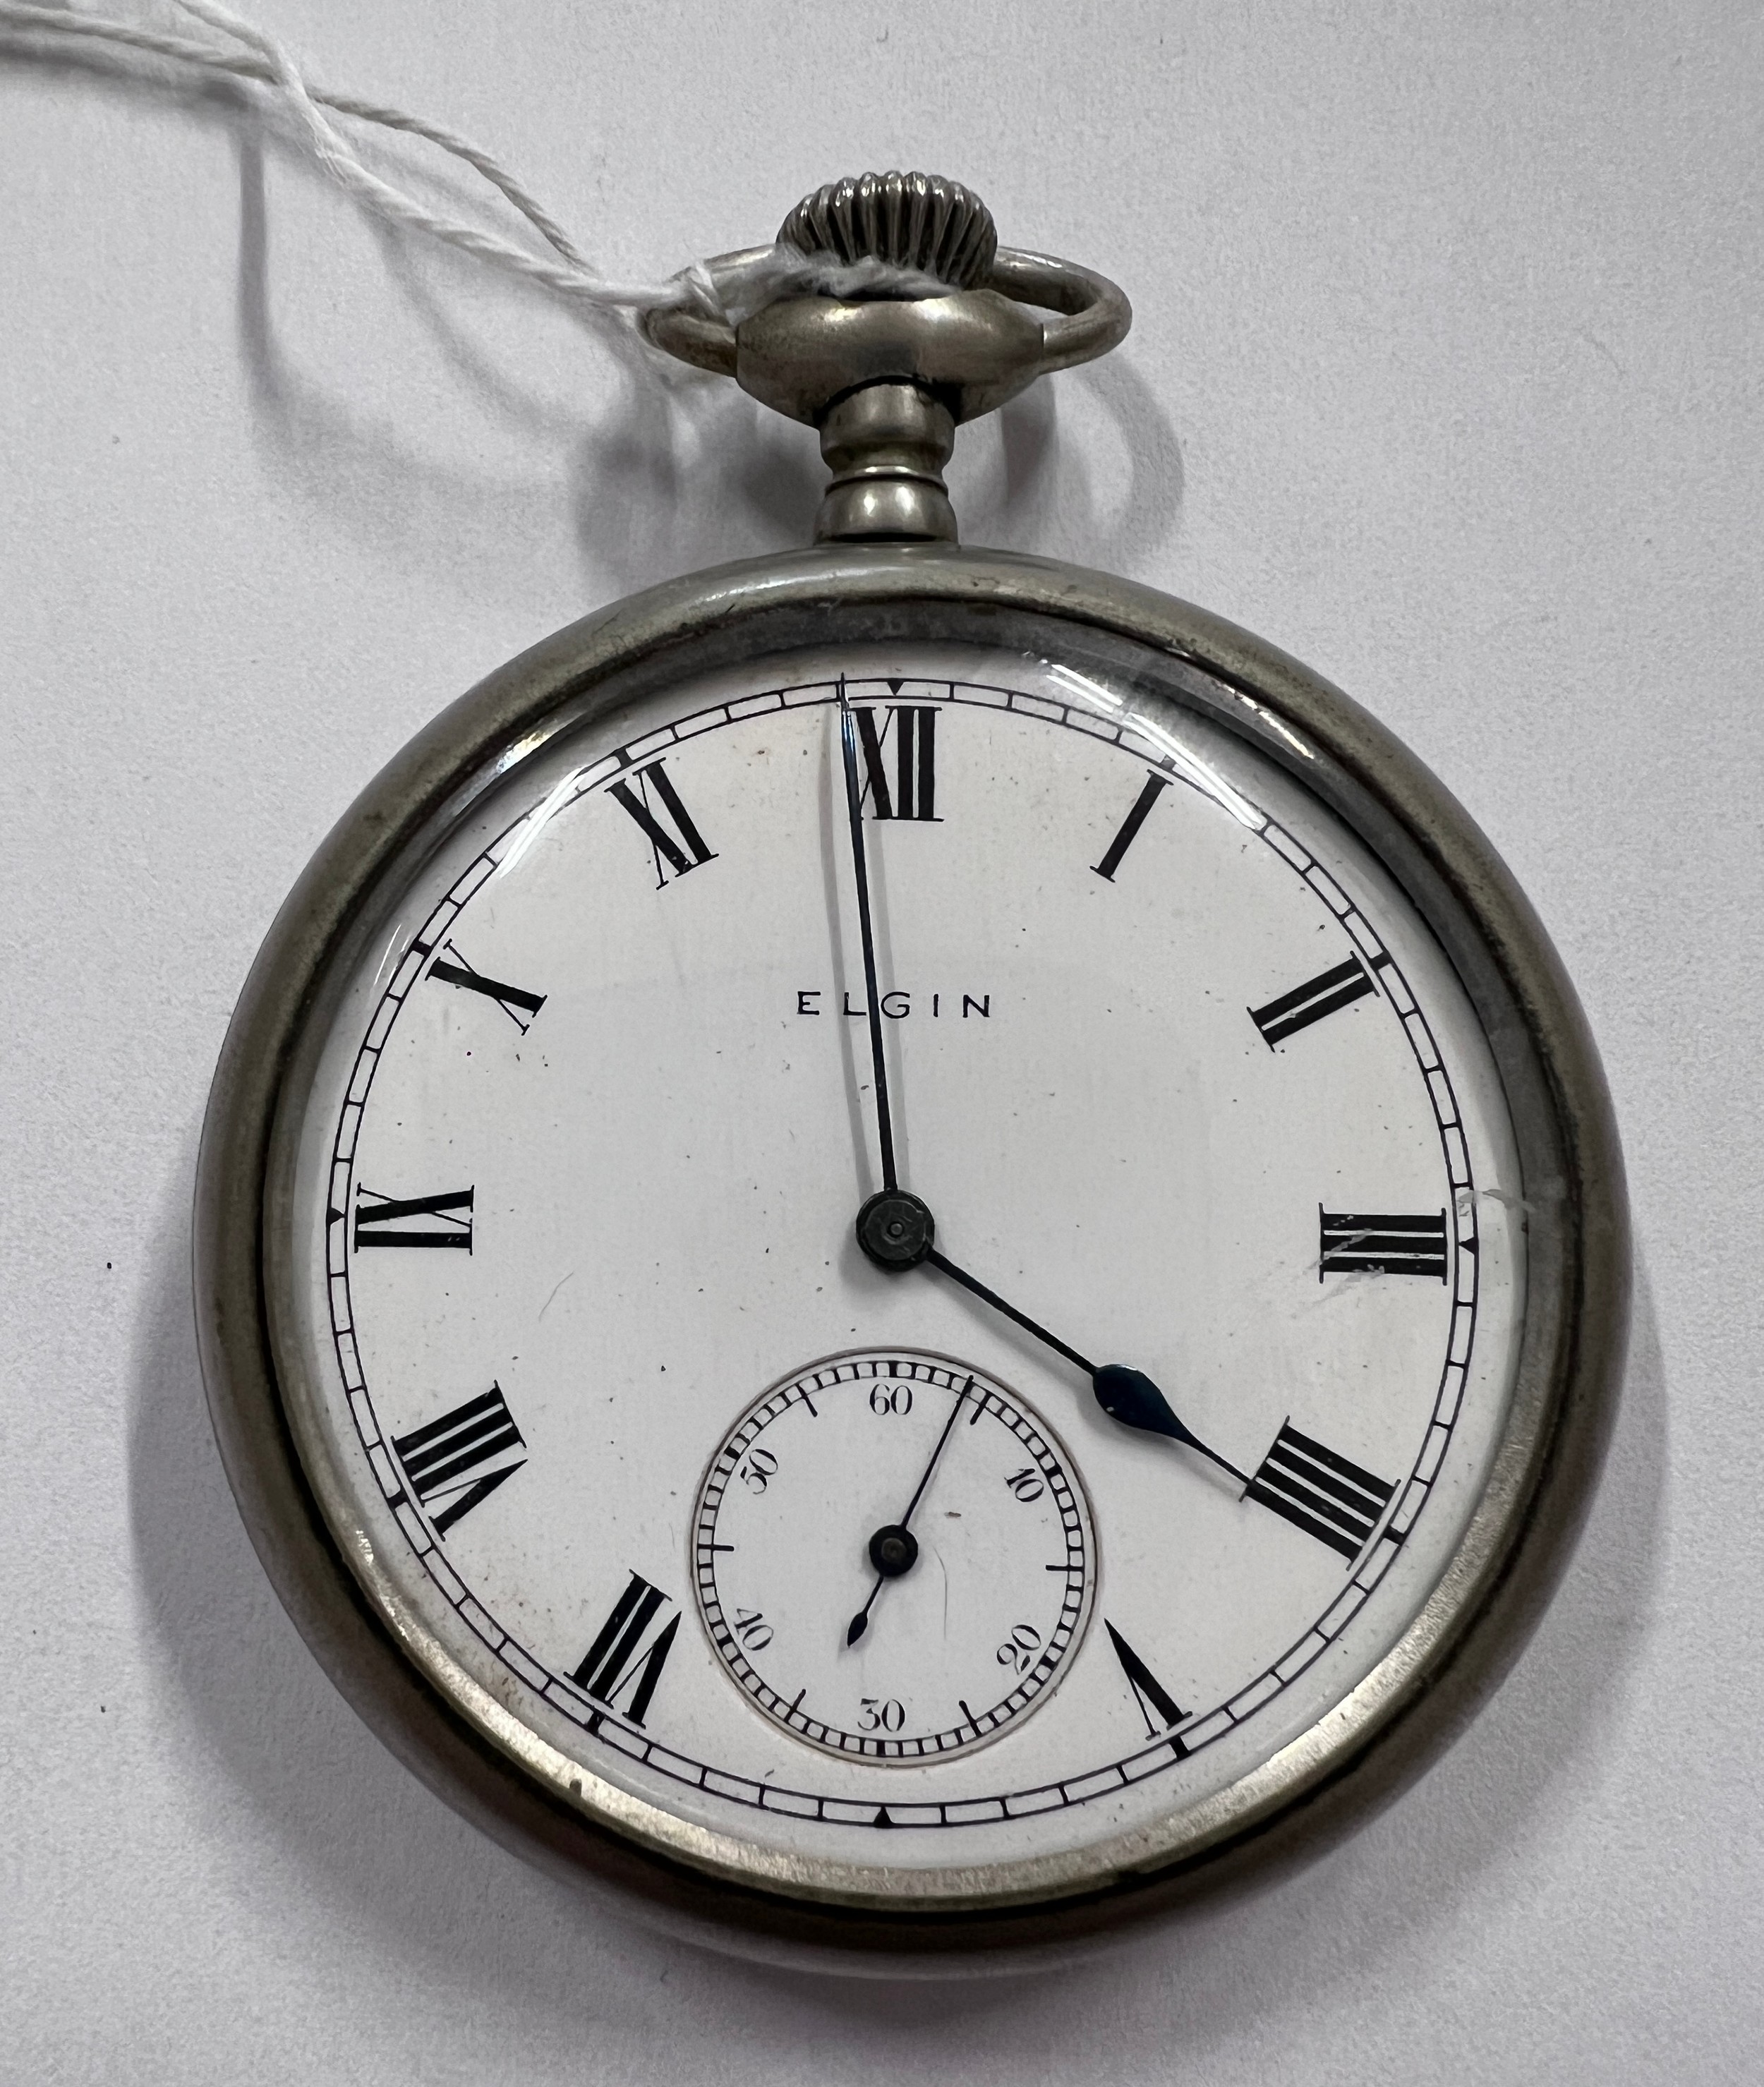 An Elgin pocket watch. Winds and goes.